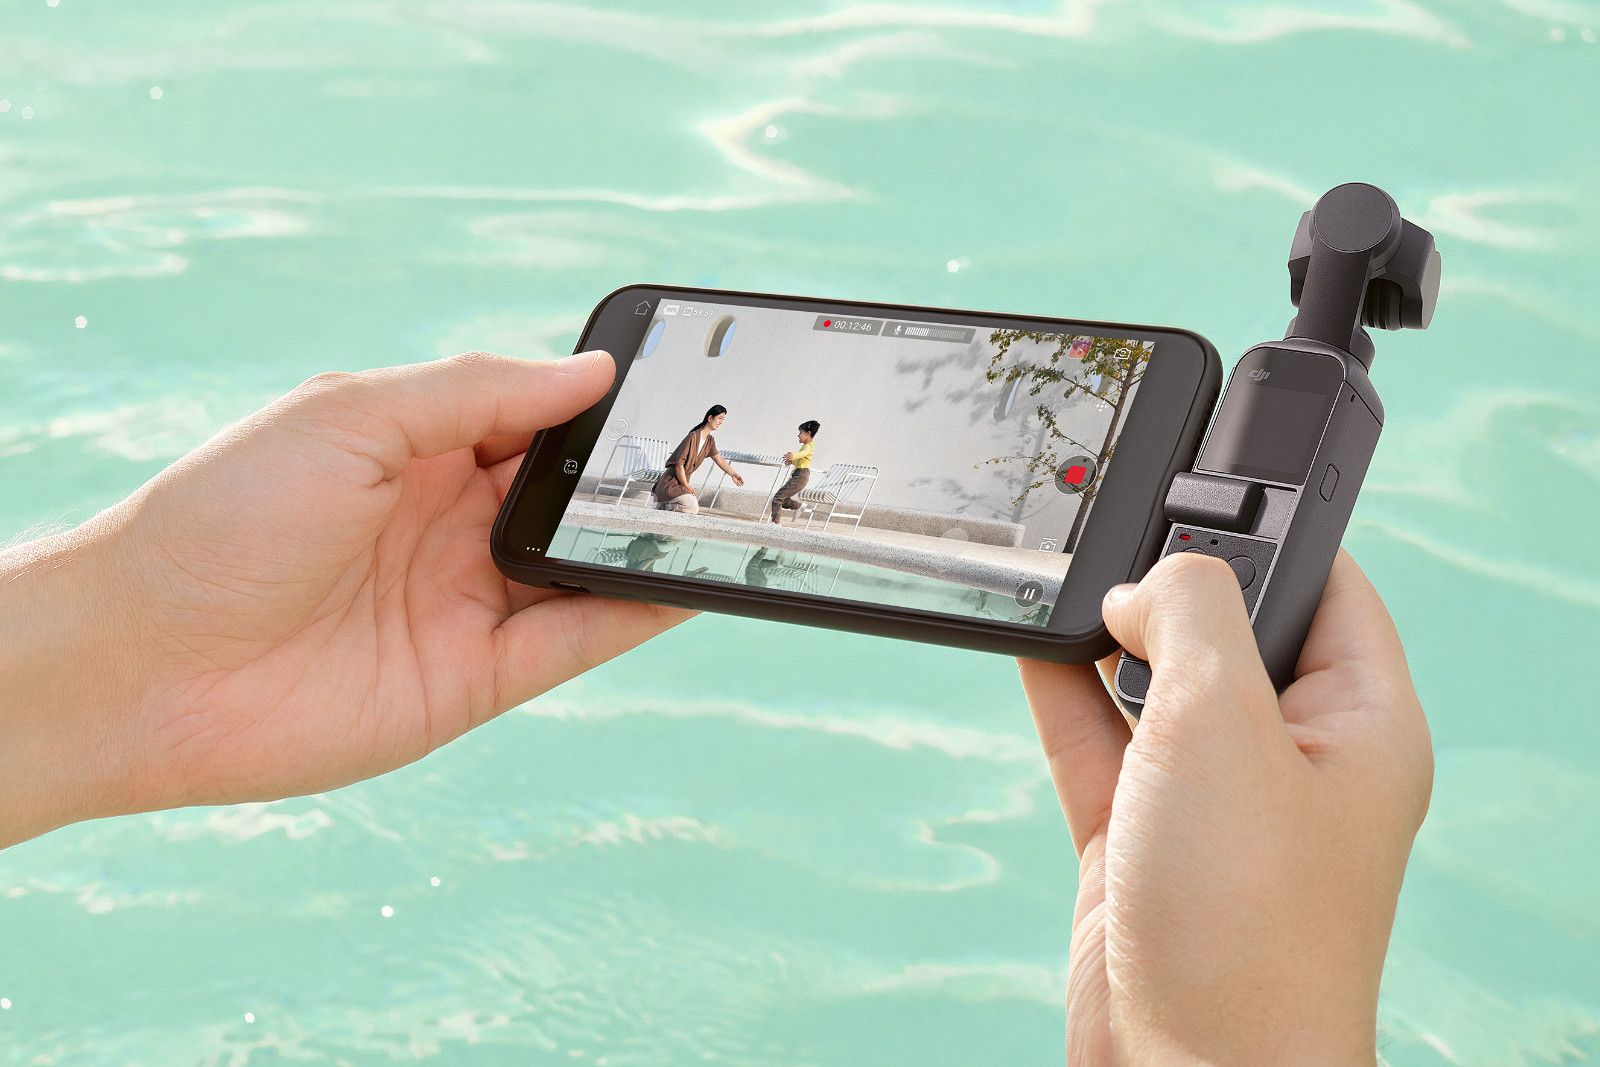 DJI Pocket 2 packs in 4K/60 100Mbps and HDR video into a tiny stabilised camera photo 2